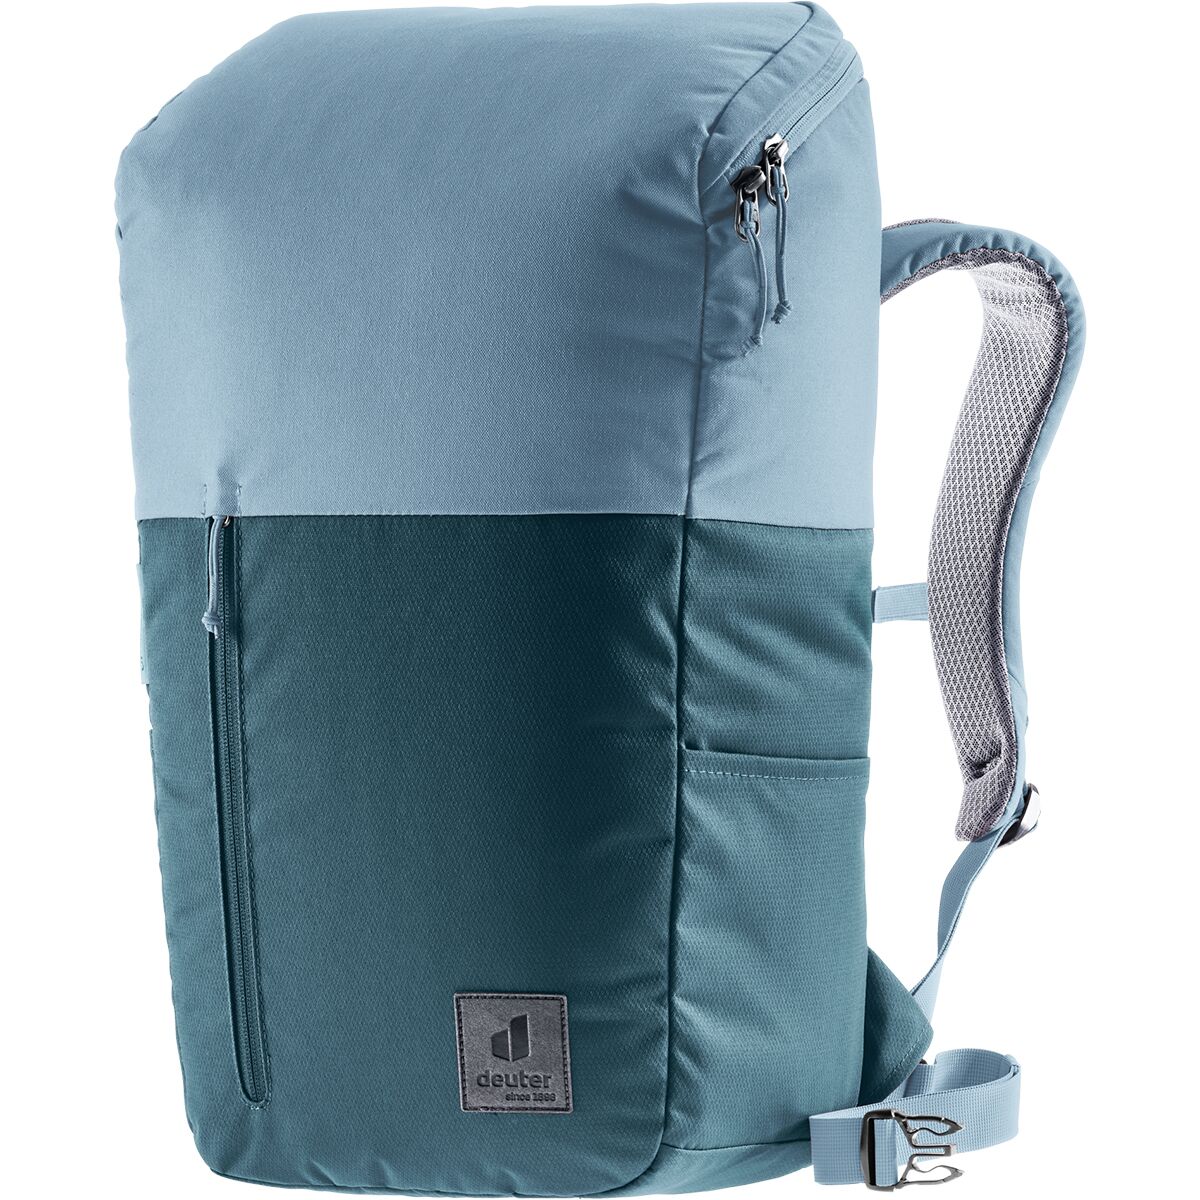 Sale 30% OFF] THE NORTH FACE The North Face Musette Bag 10L